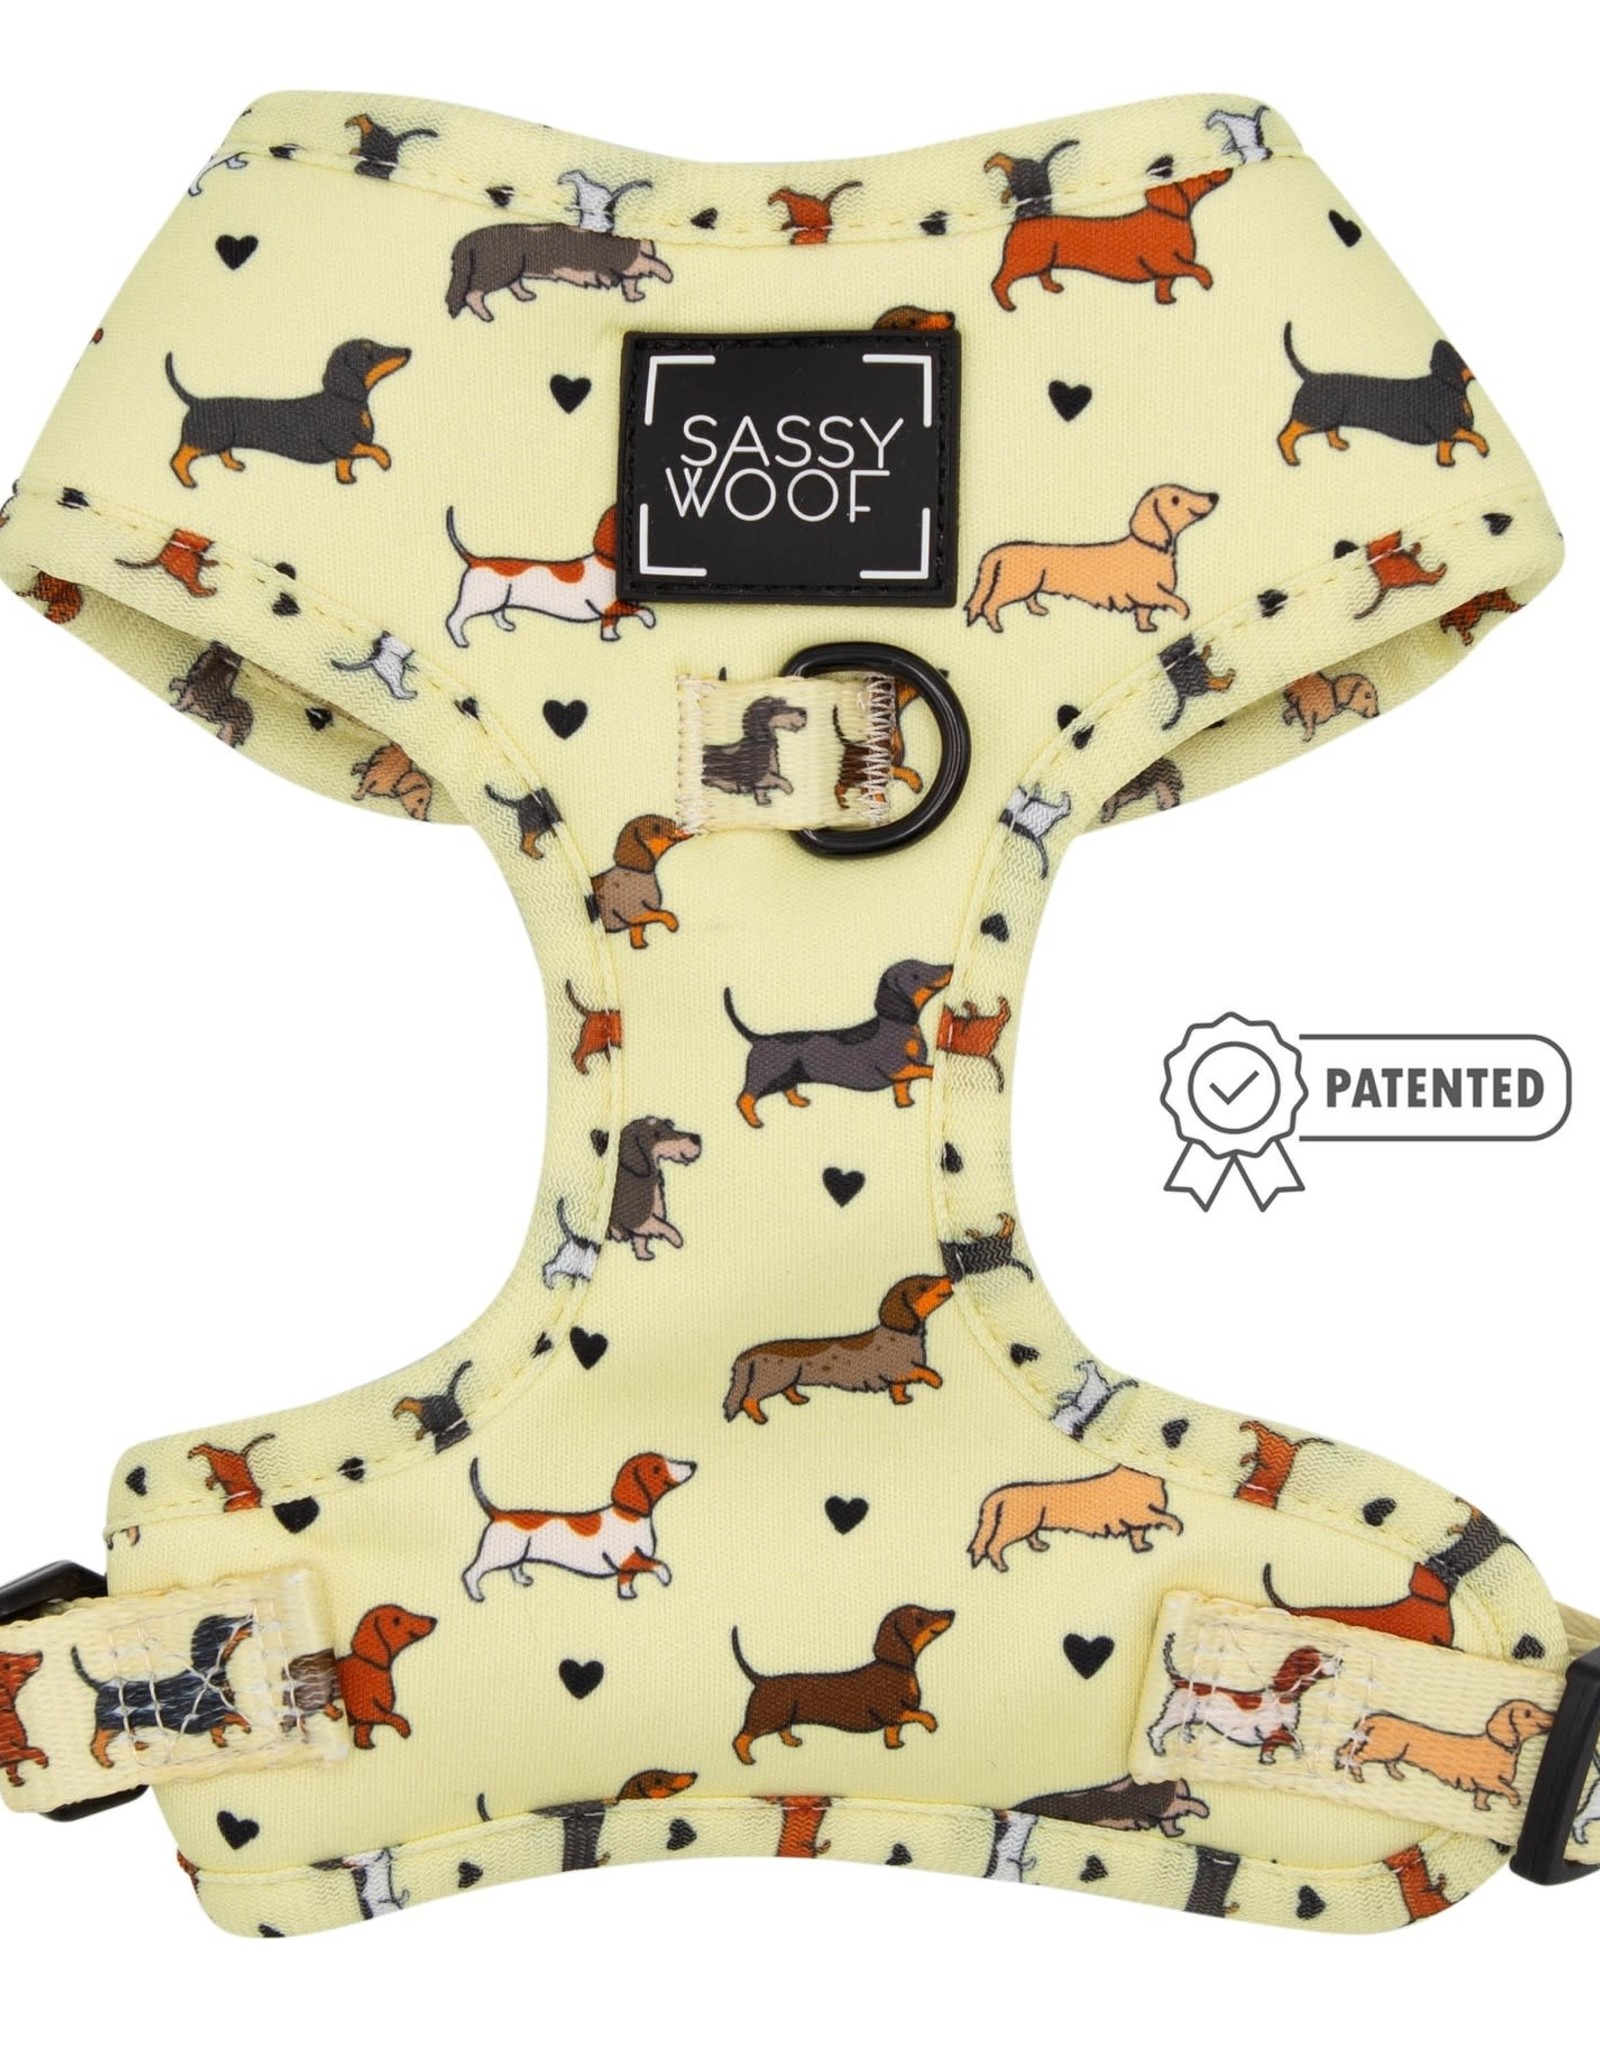 Sassy Woof Doxie Delight Adjustable Dog Harness